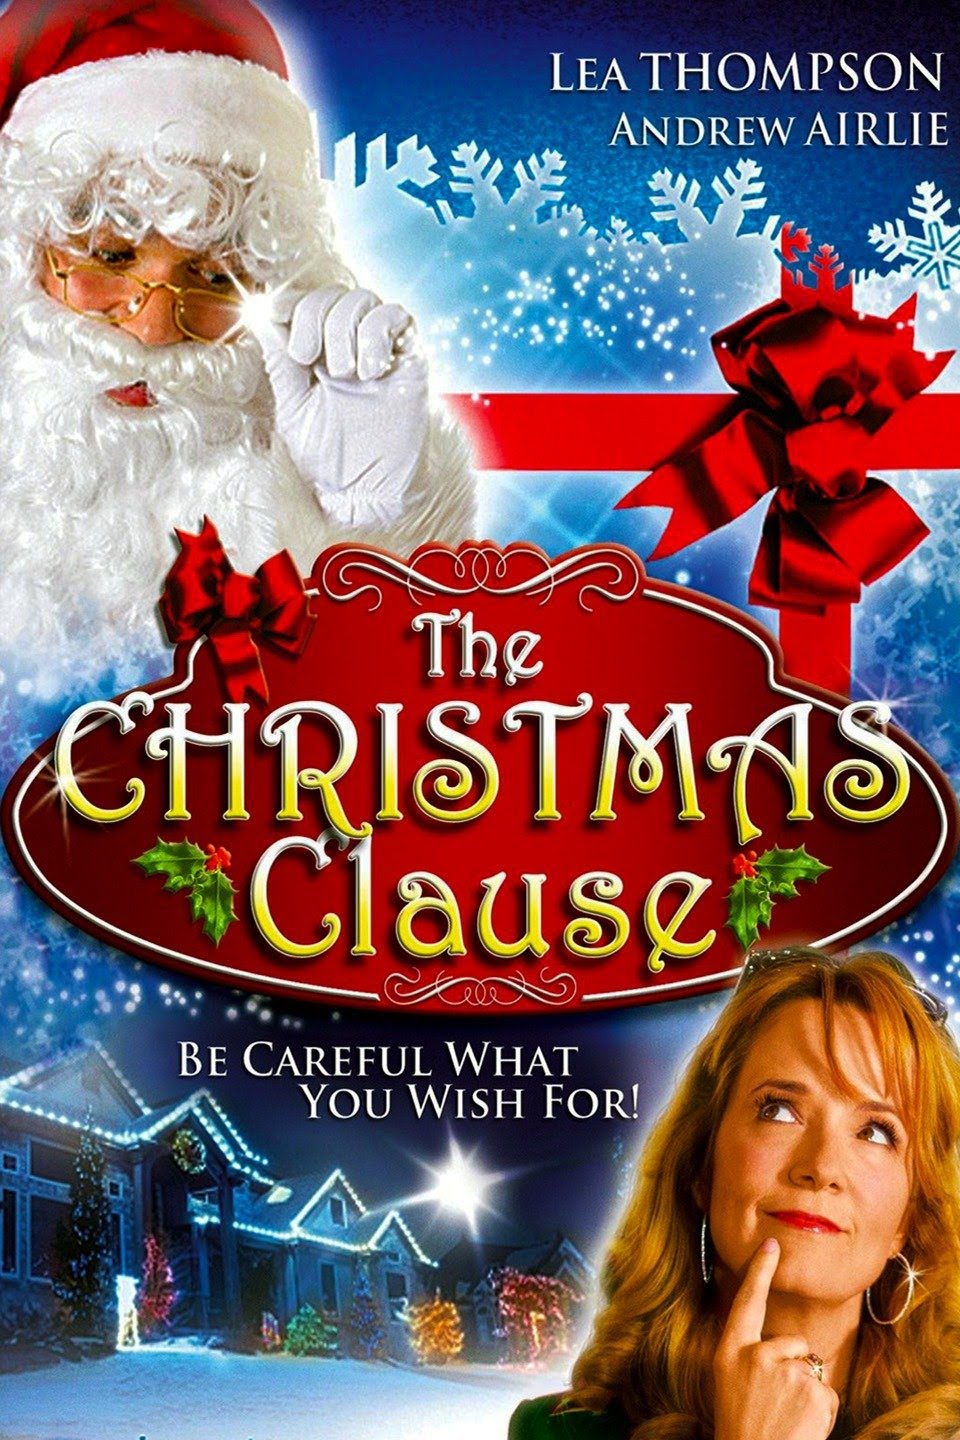 The Christmas Clause Dvd (2008)